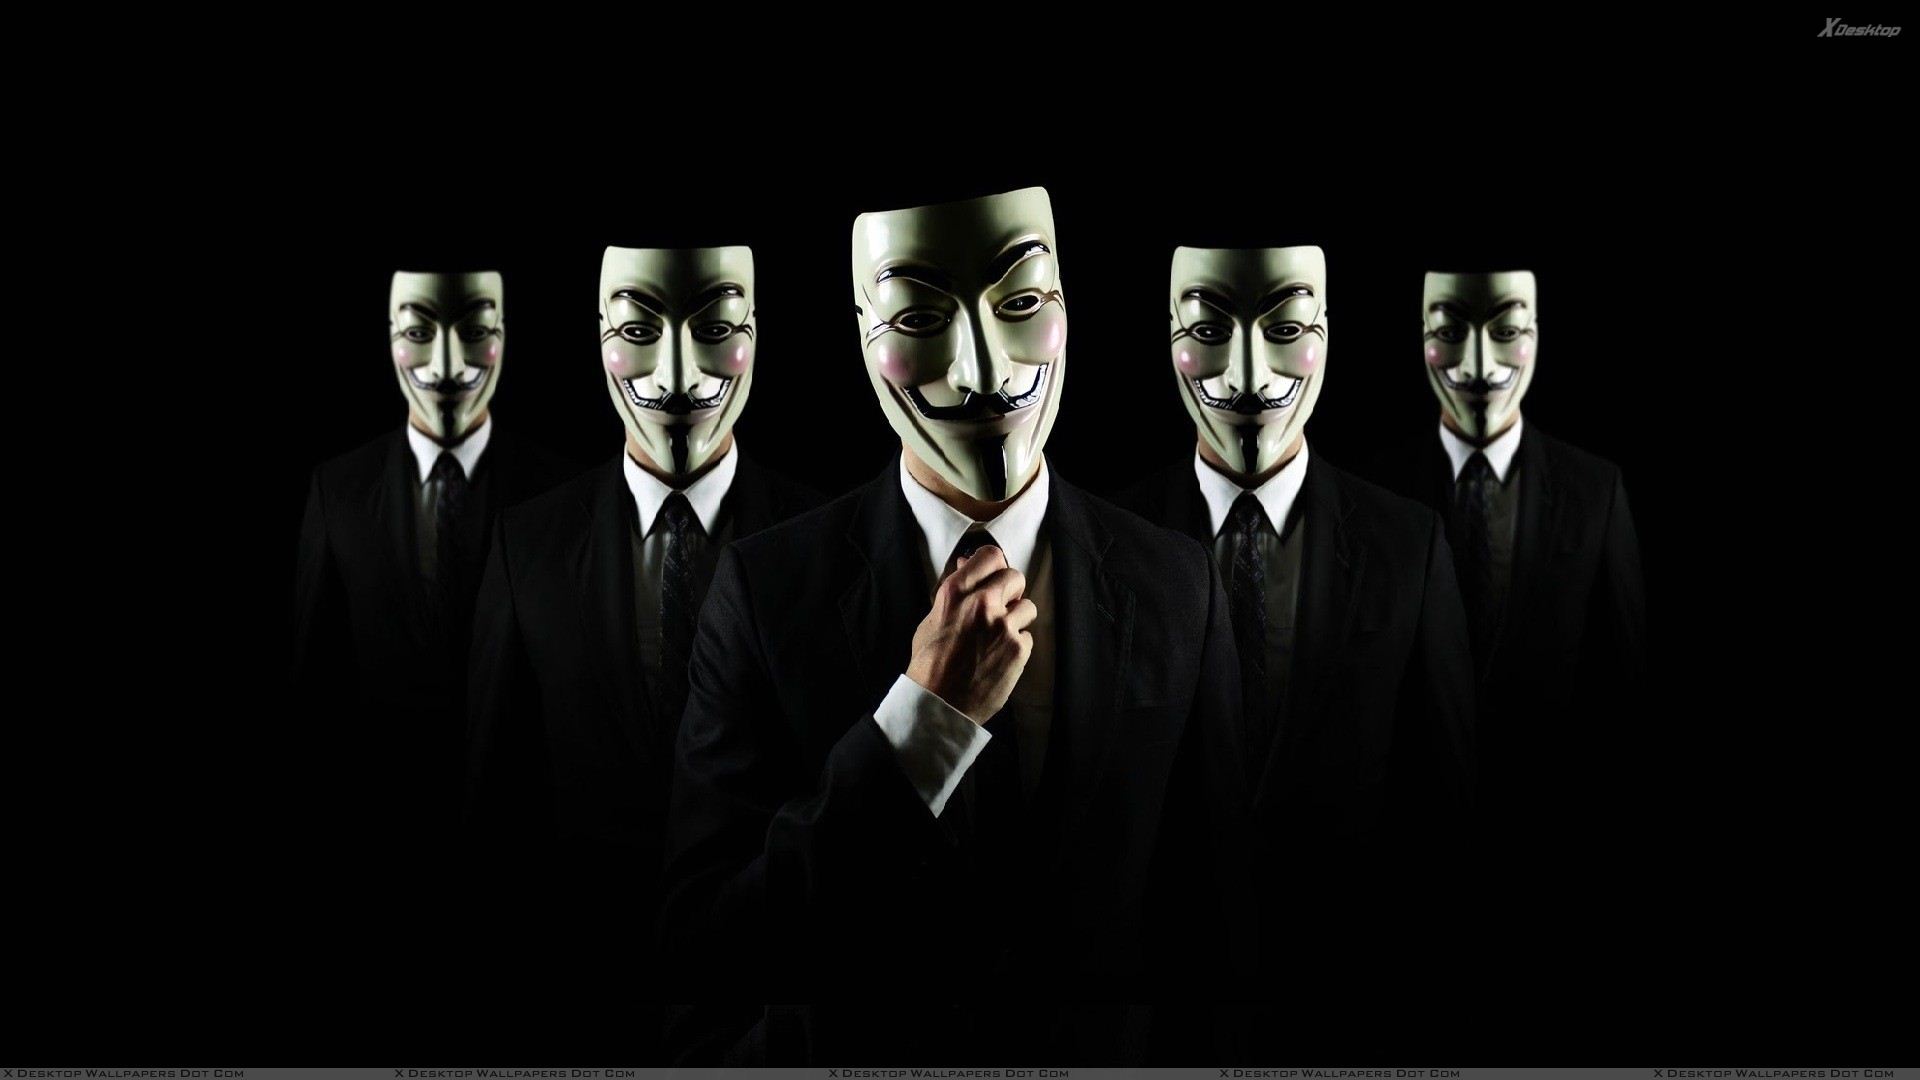 We Are Anonymous Wallpaper 1920x1080